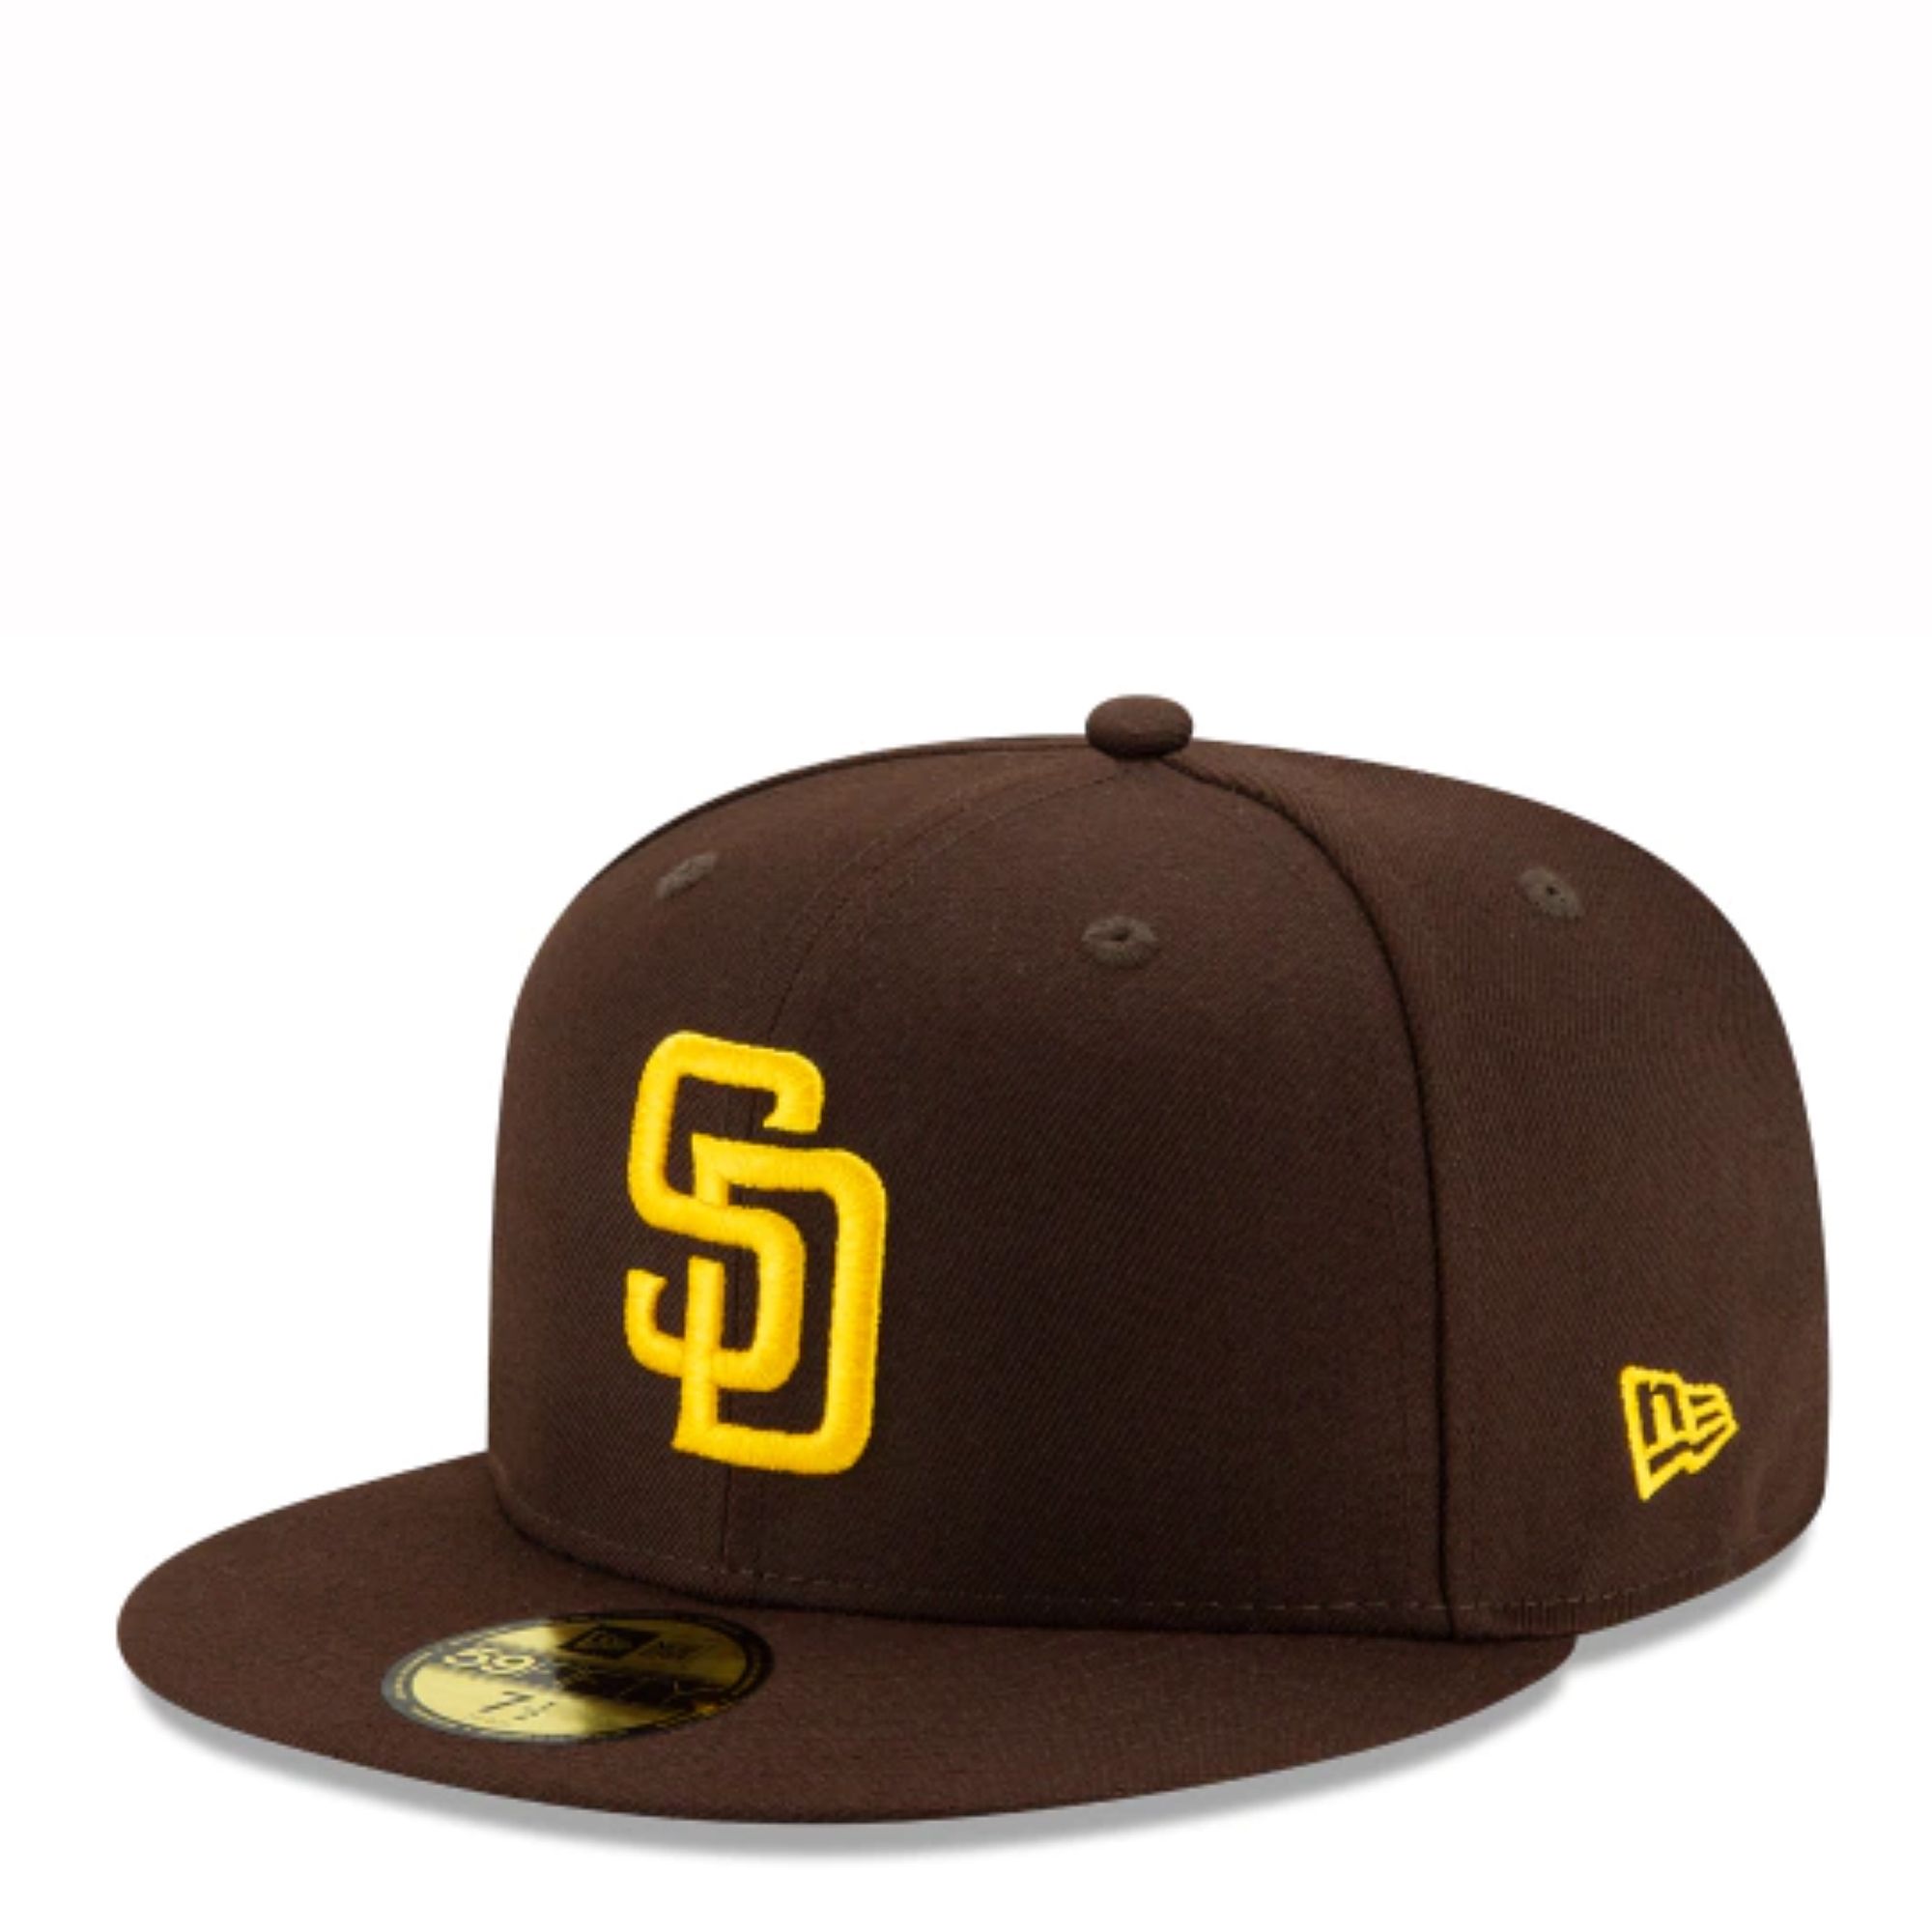 San Diego Padres on X: Reppin' brown and gold at this morning's